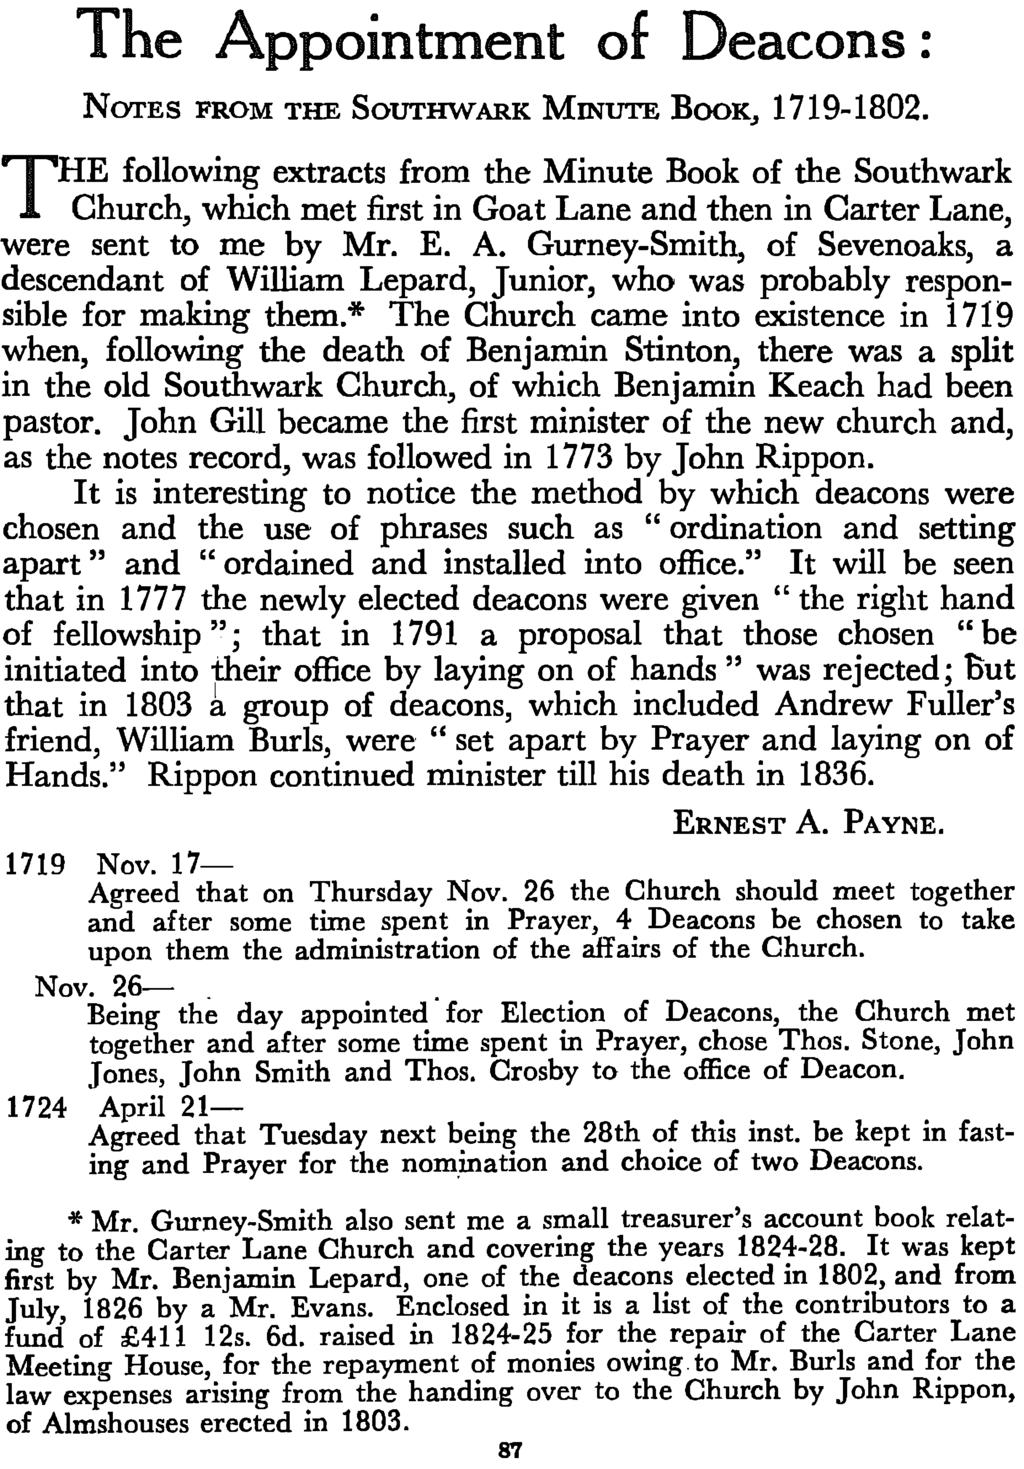 The Appointment of Deacons: NOTES FROM THE SOUTHWARK MINUTE BOOK, 1719-1802.